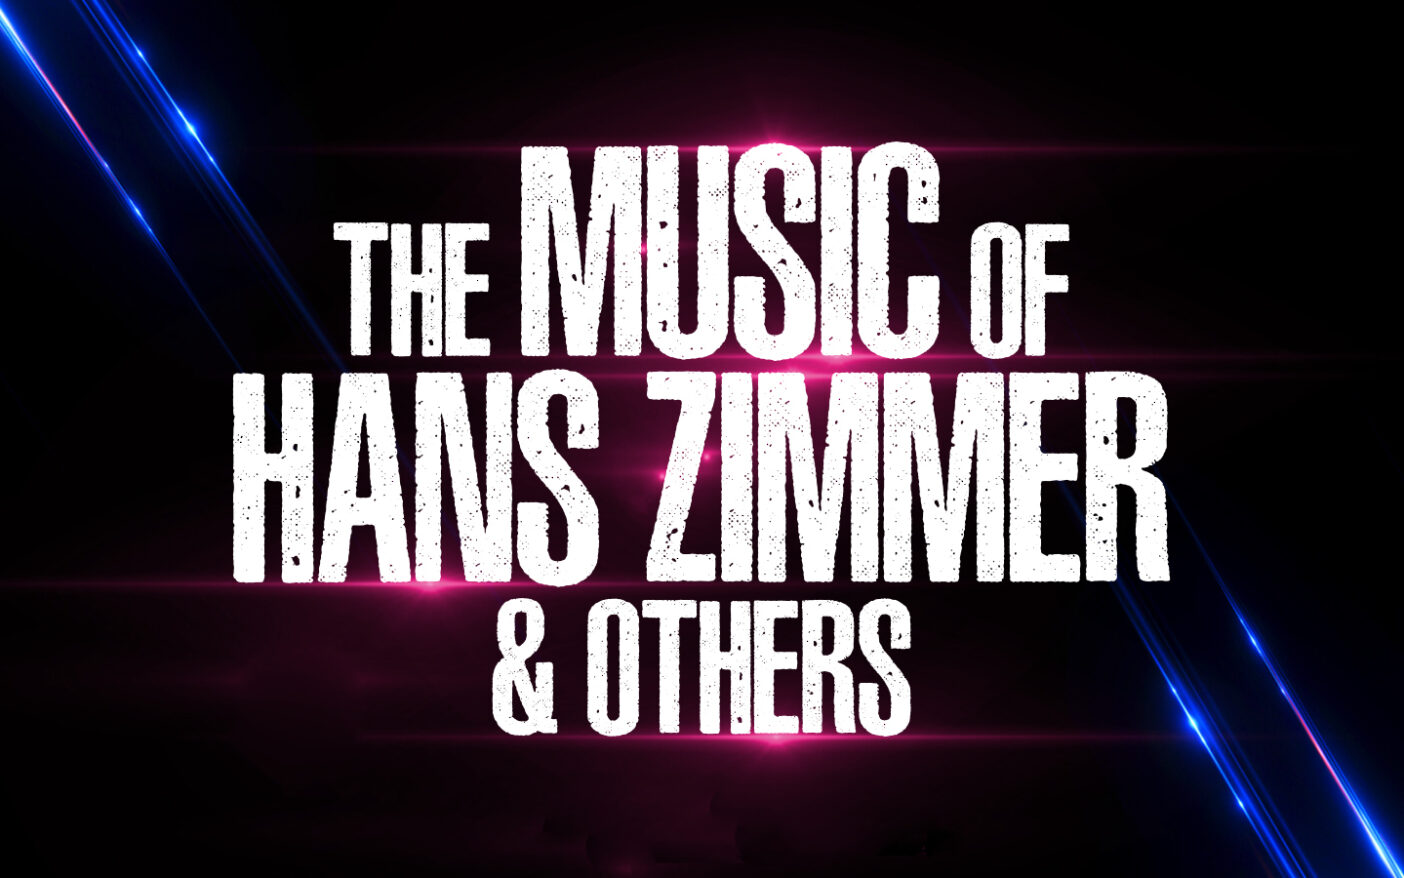 The Music of Hans Zimmer and others-in concert